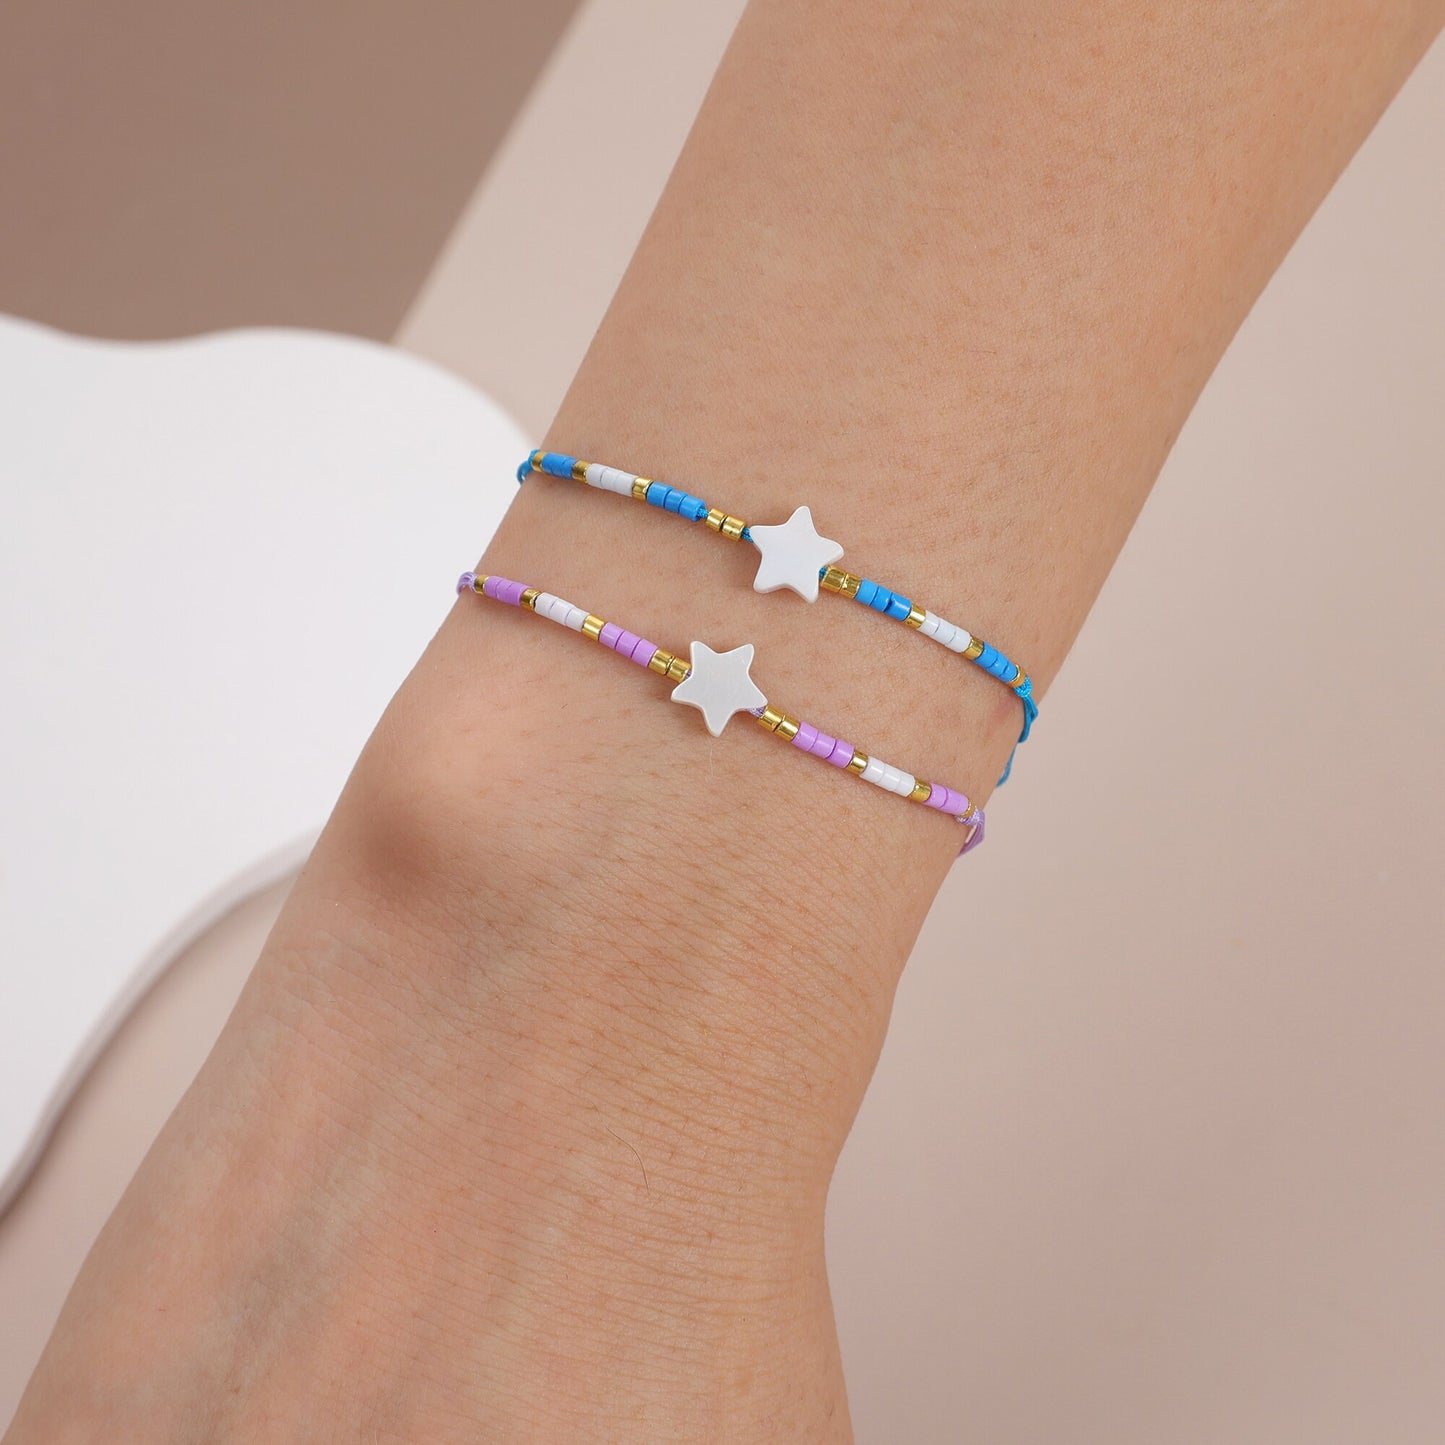 12pcs/set Shell Star Charms Bracelets High Quality Colorful Seeds Beads Handmade Braided Bracelet for Women Party Jewelry